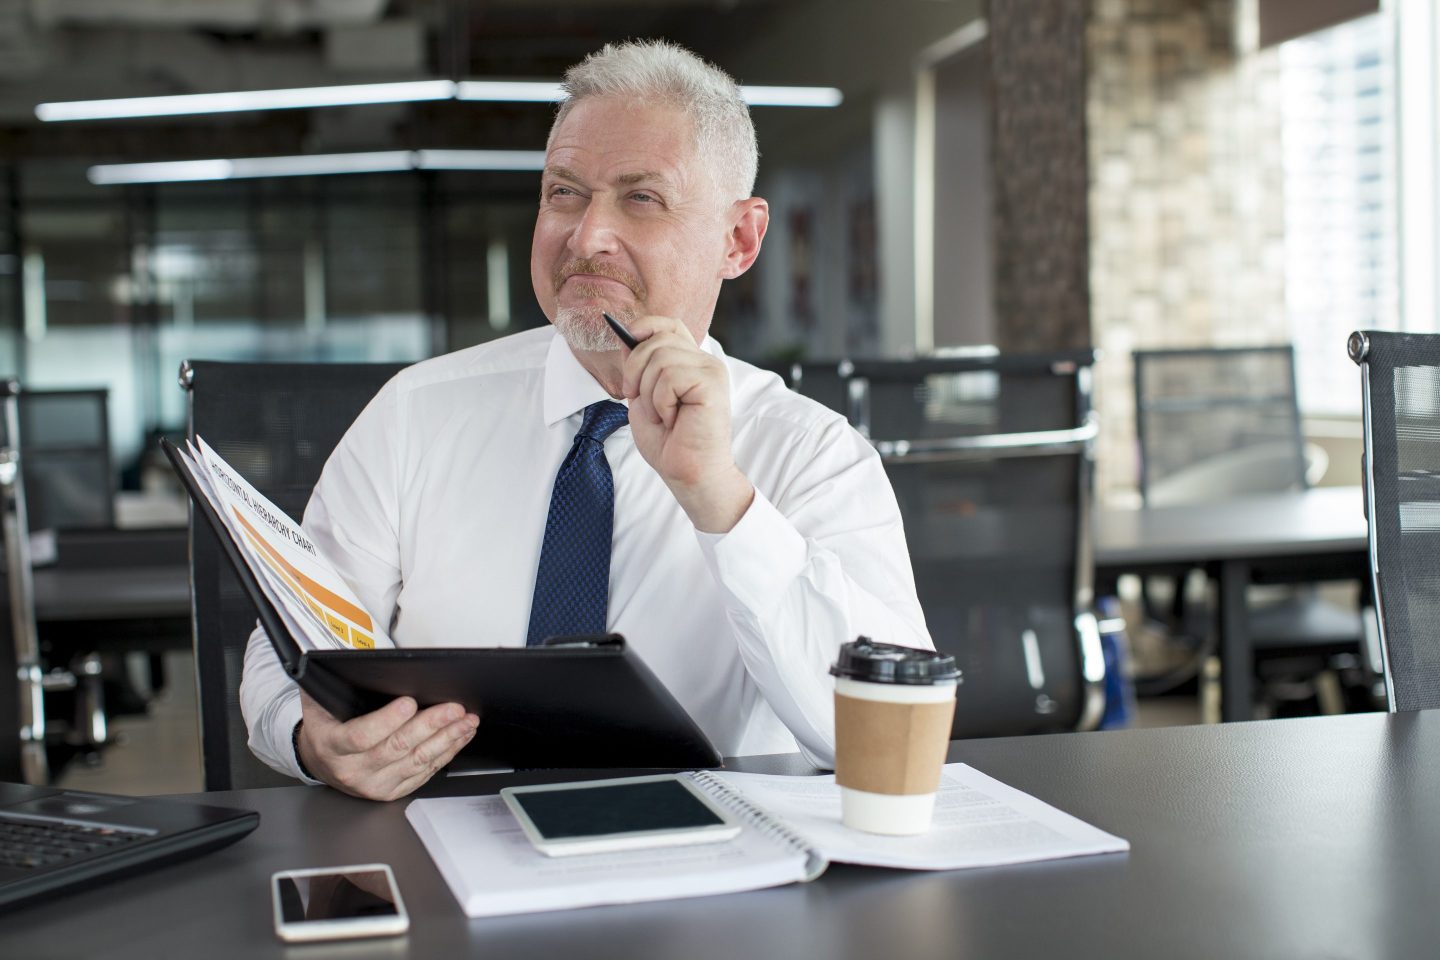 Content business leader thinking over investment plan and profit. Mature man in tie with satisfied and pensive face holding open folder with documents. Business plan and success concept